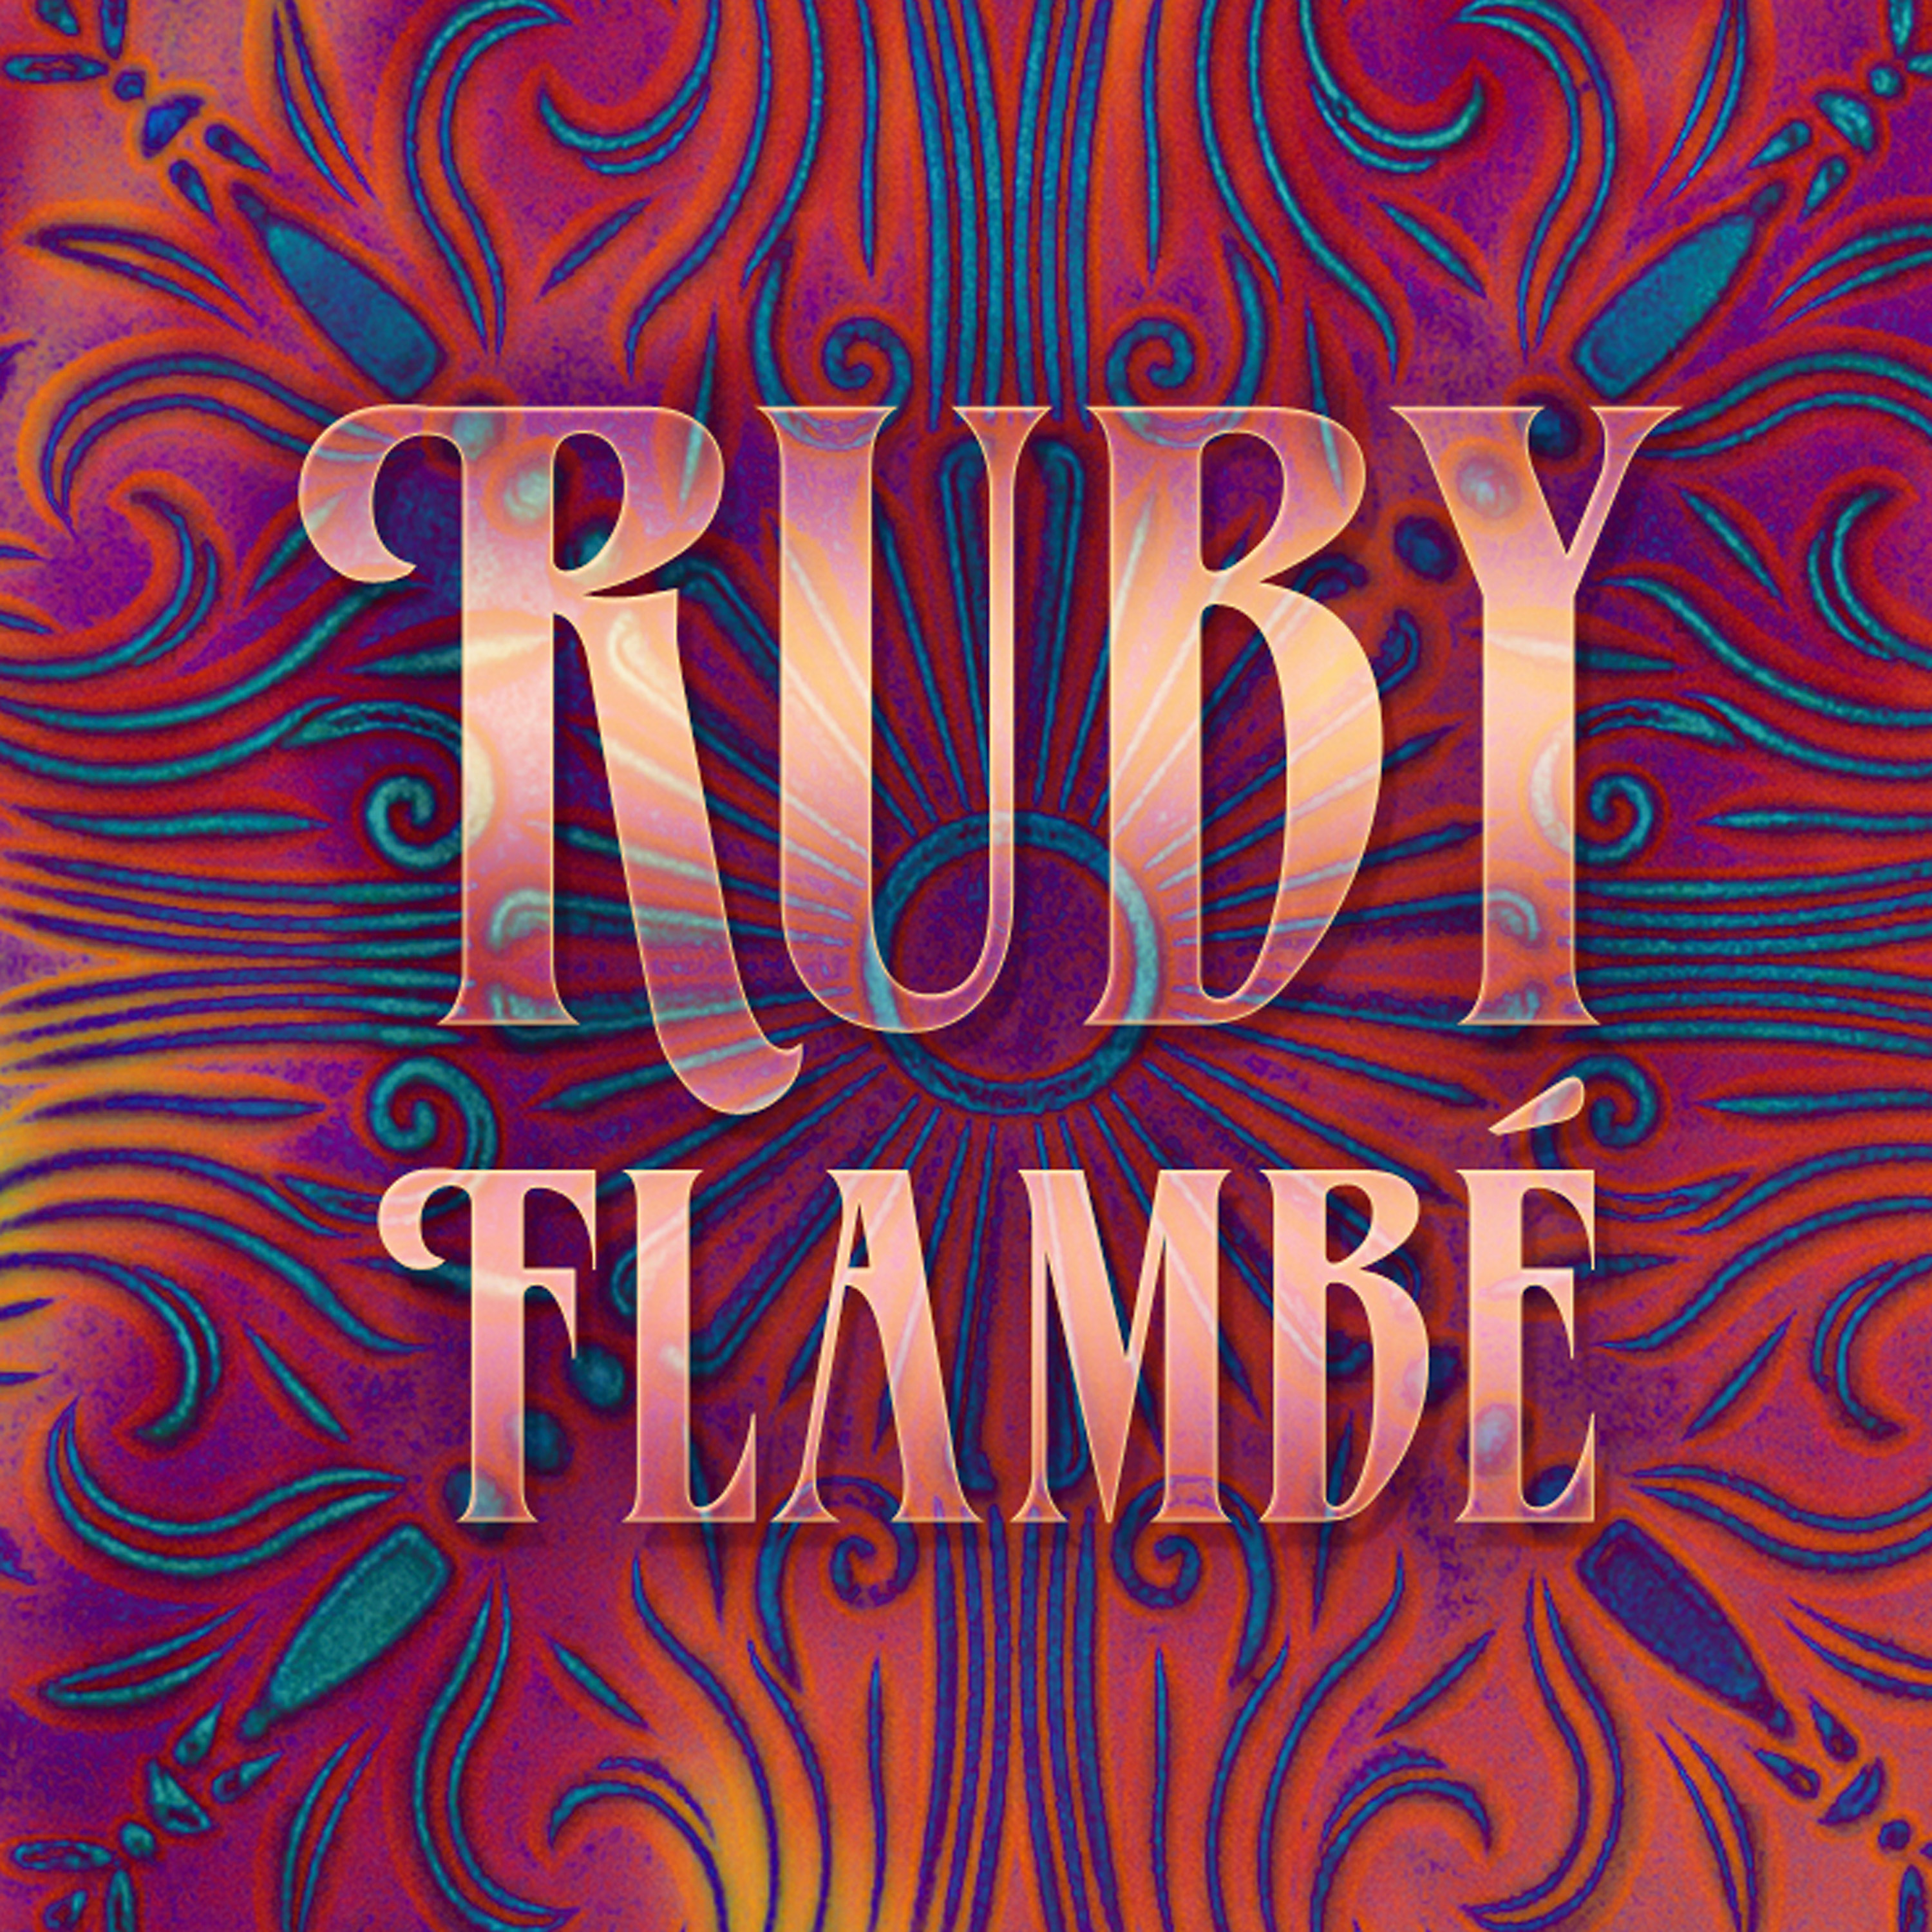 Ruby Flambé – Music Production and Promotional Campaign